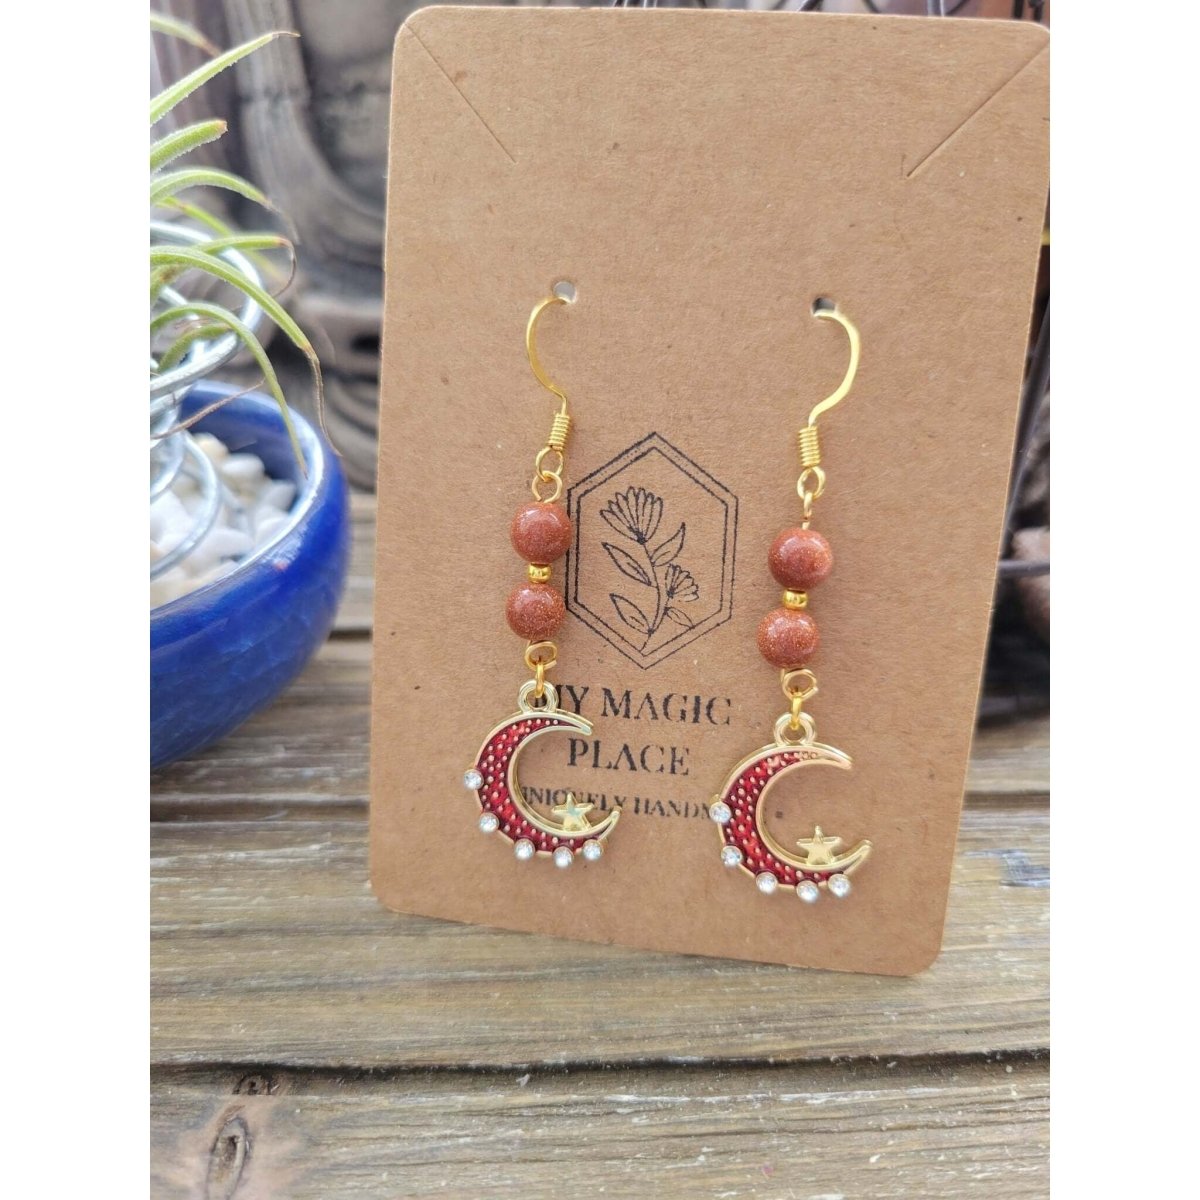 Crystal Beads and Charms Earrings, Crystal Jewelry , Gold Color Earrings Earrings My Magic Place Shop Citrine Moon & Star